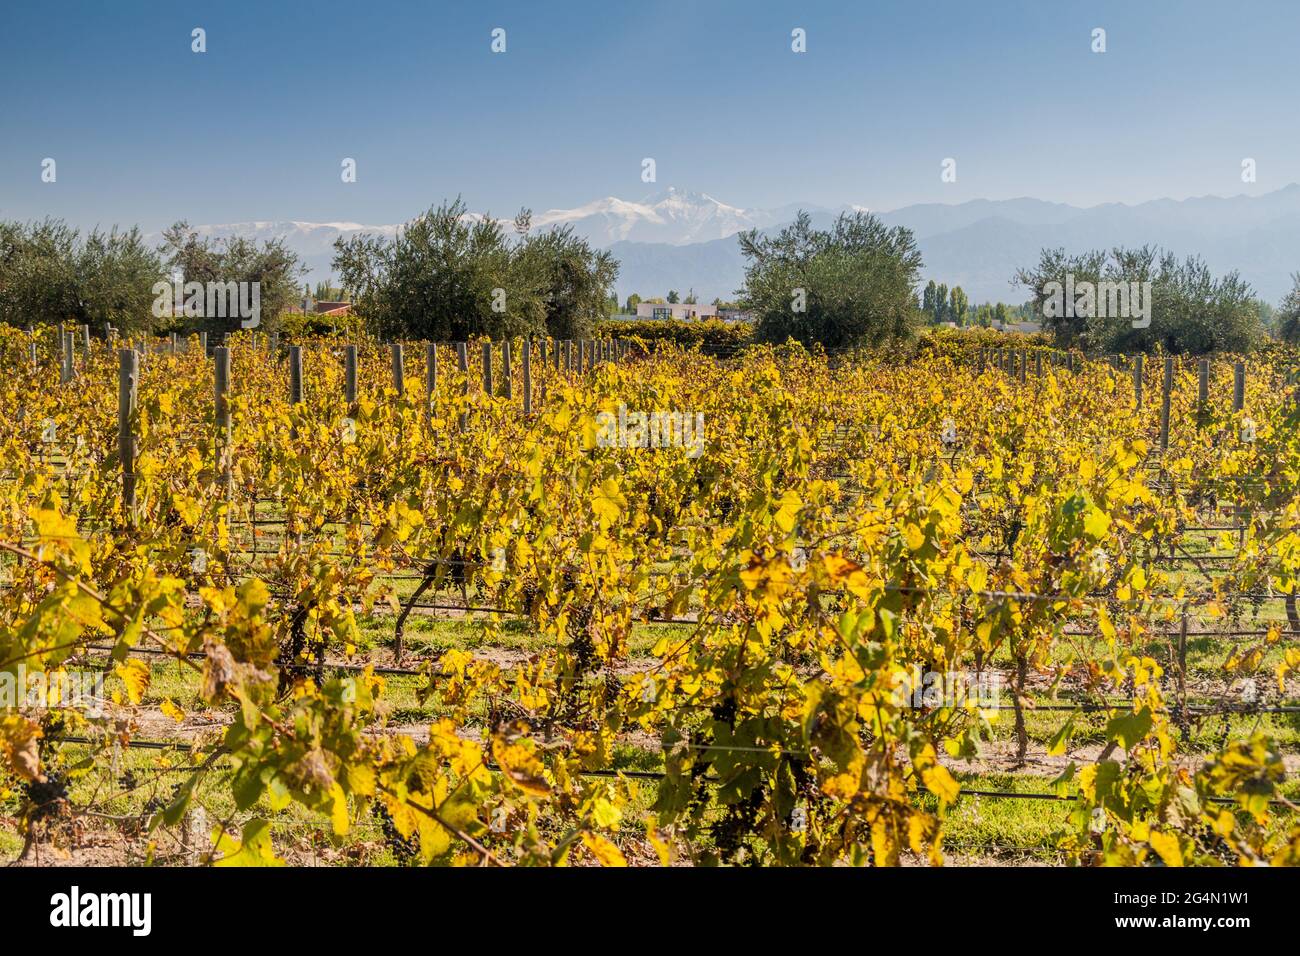 Vineyard near Mendoza, Argentina. Andes mountains in the background. Stock Photo